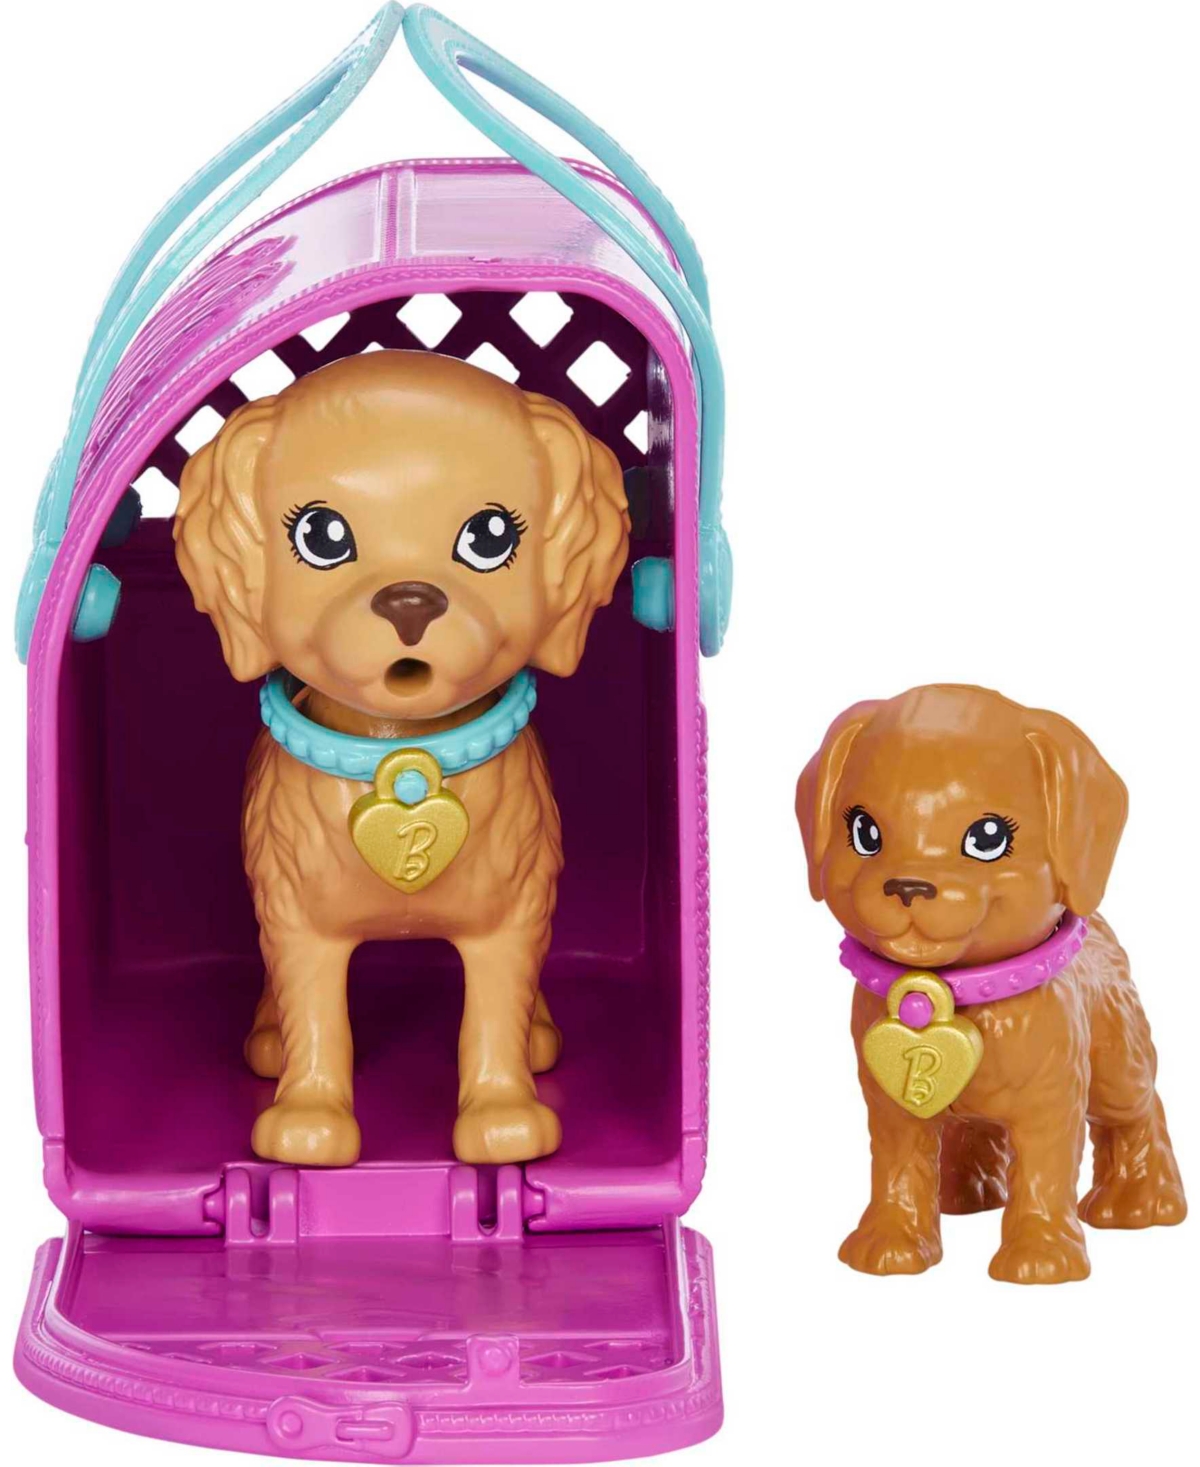 Shop Barbie Doll And Accessories Pup Adoption Playset With Doll, 2 Puppies And Color-change In Multi-color